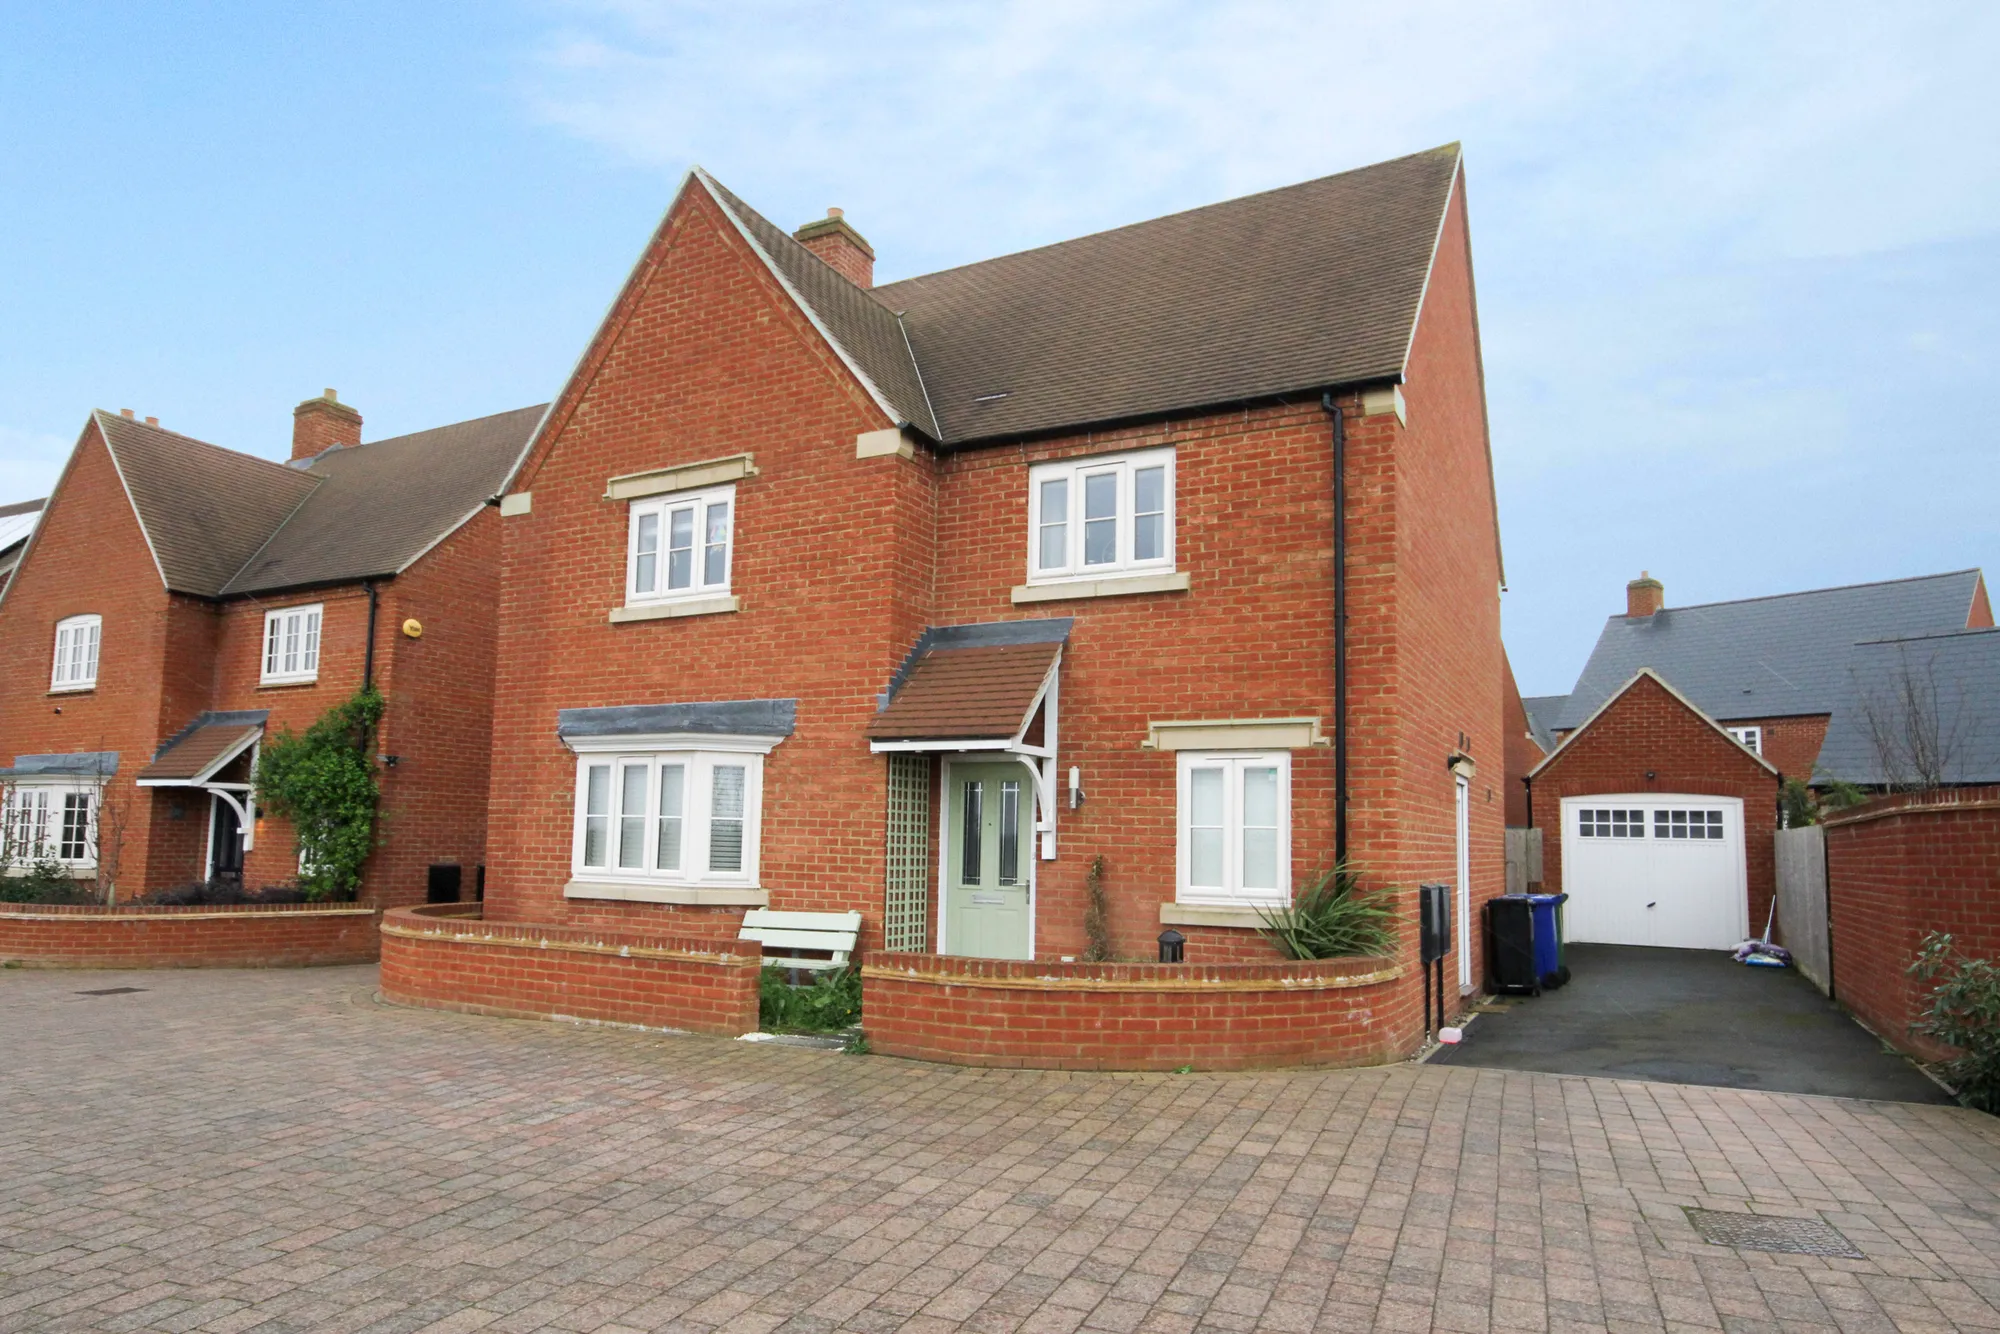 4 bed detached house for sale in Hyperion Lane, Brackley - Property Image 1